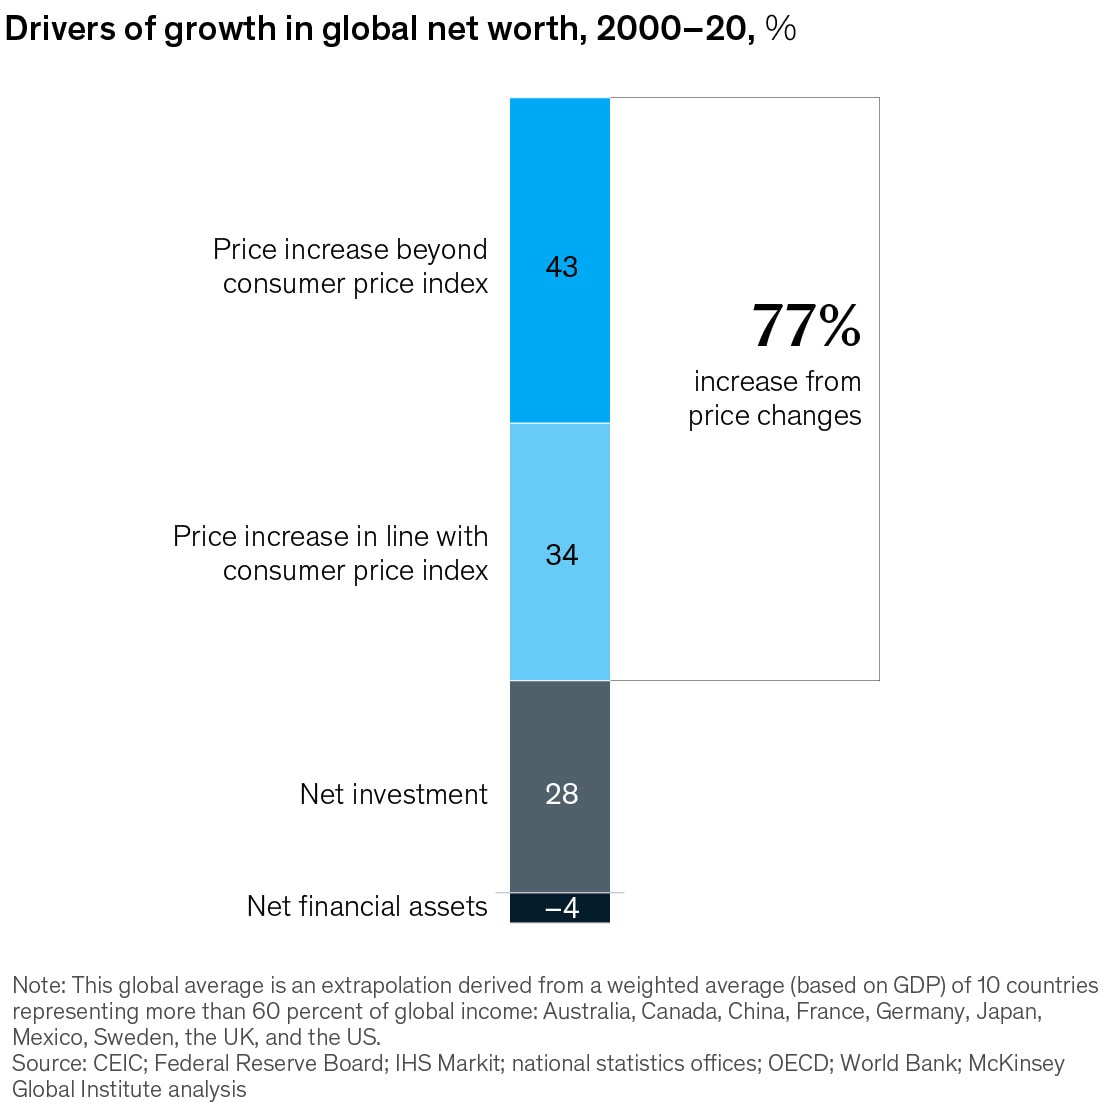 Drivers of growth in global net worth, 2000-20